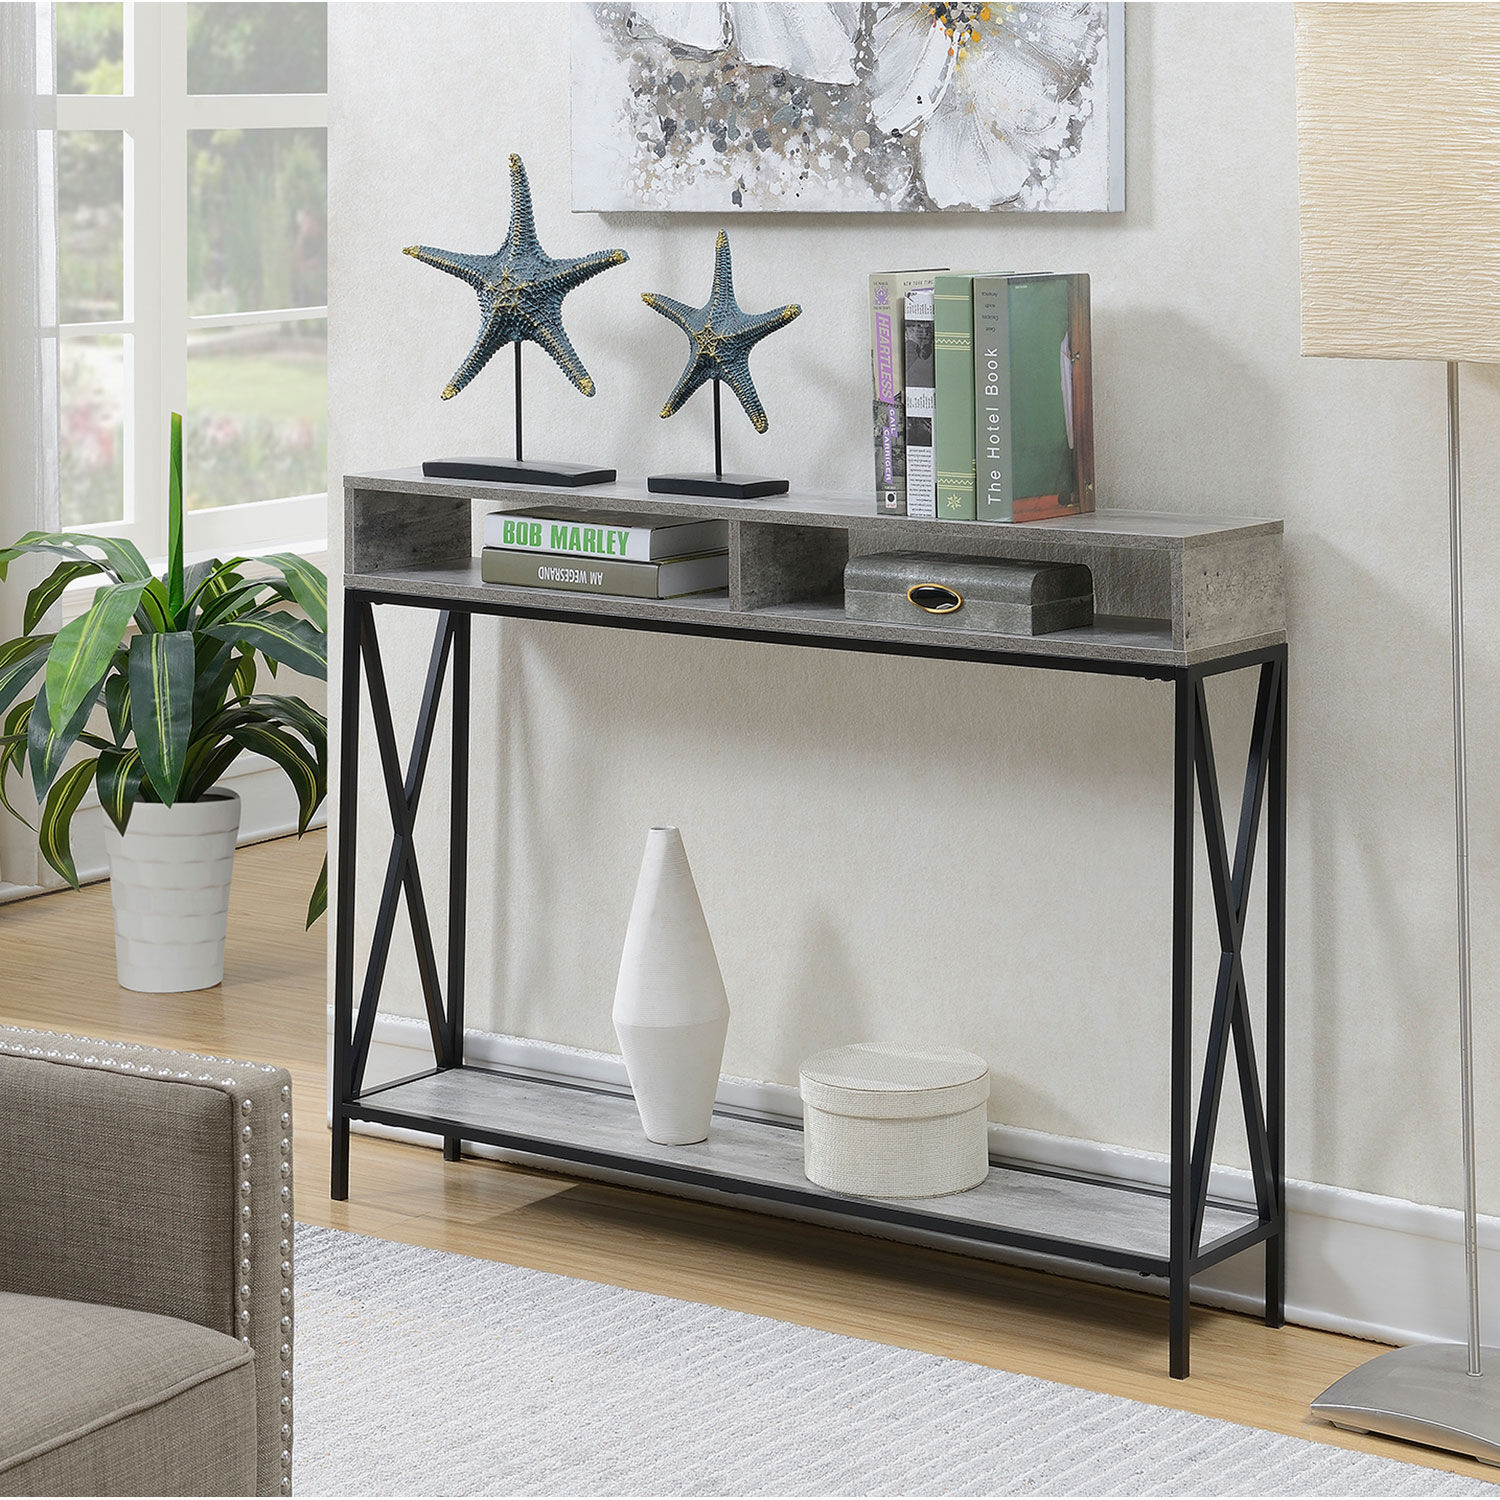 Tucson Deluxe 2 Tier Console Table in Faux Birch